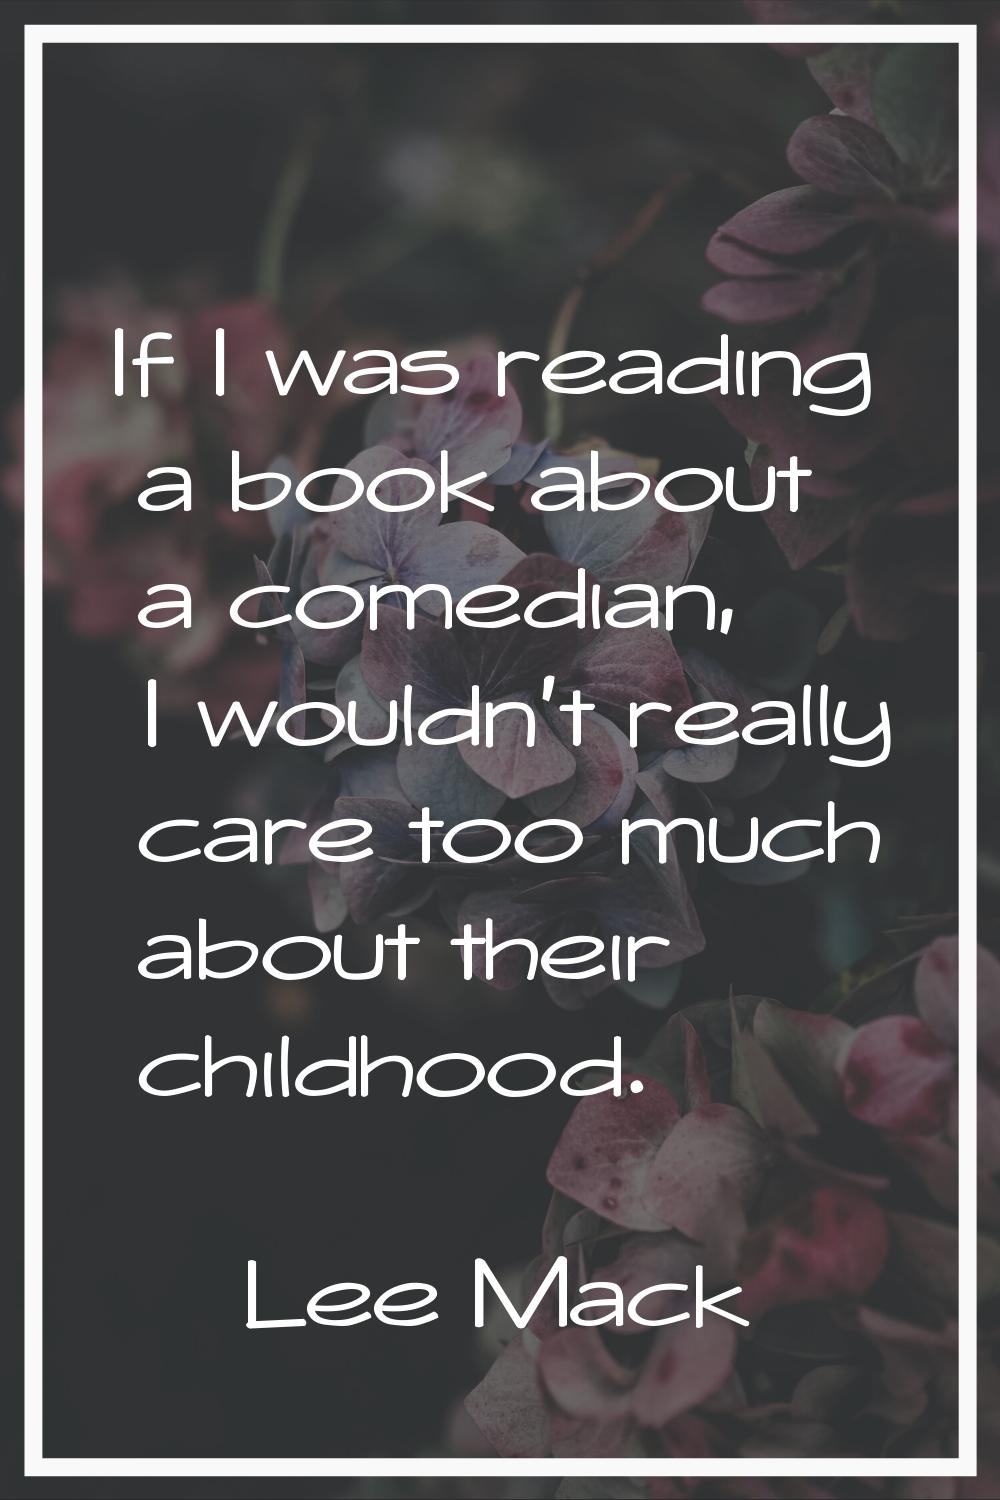 If I was reading a book about a comedian, I wouldn't really care too much about their childhood.